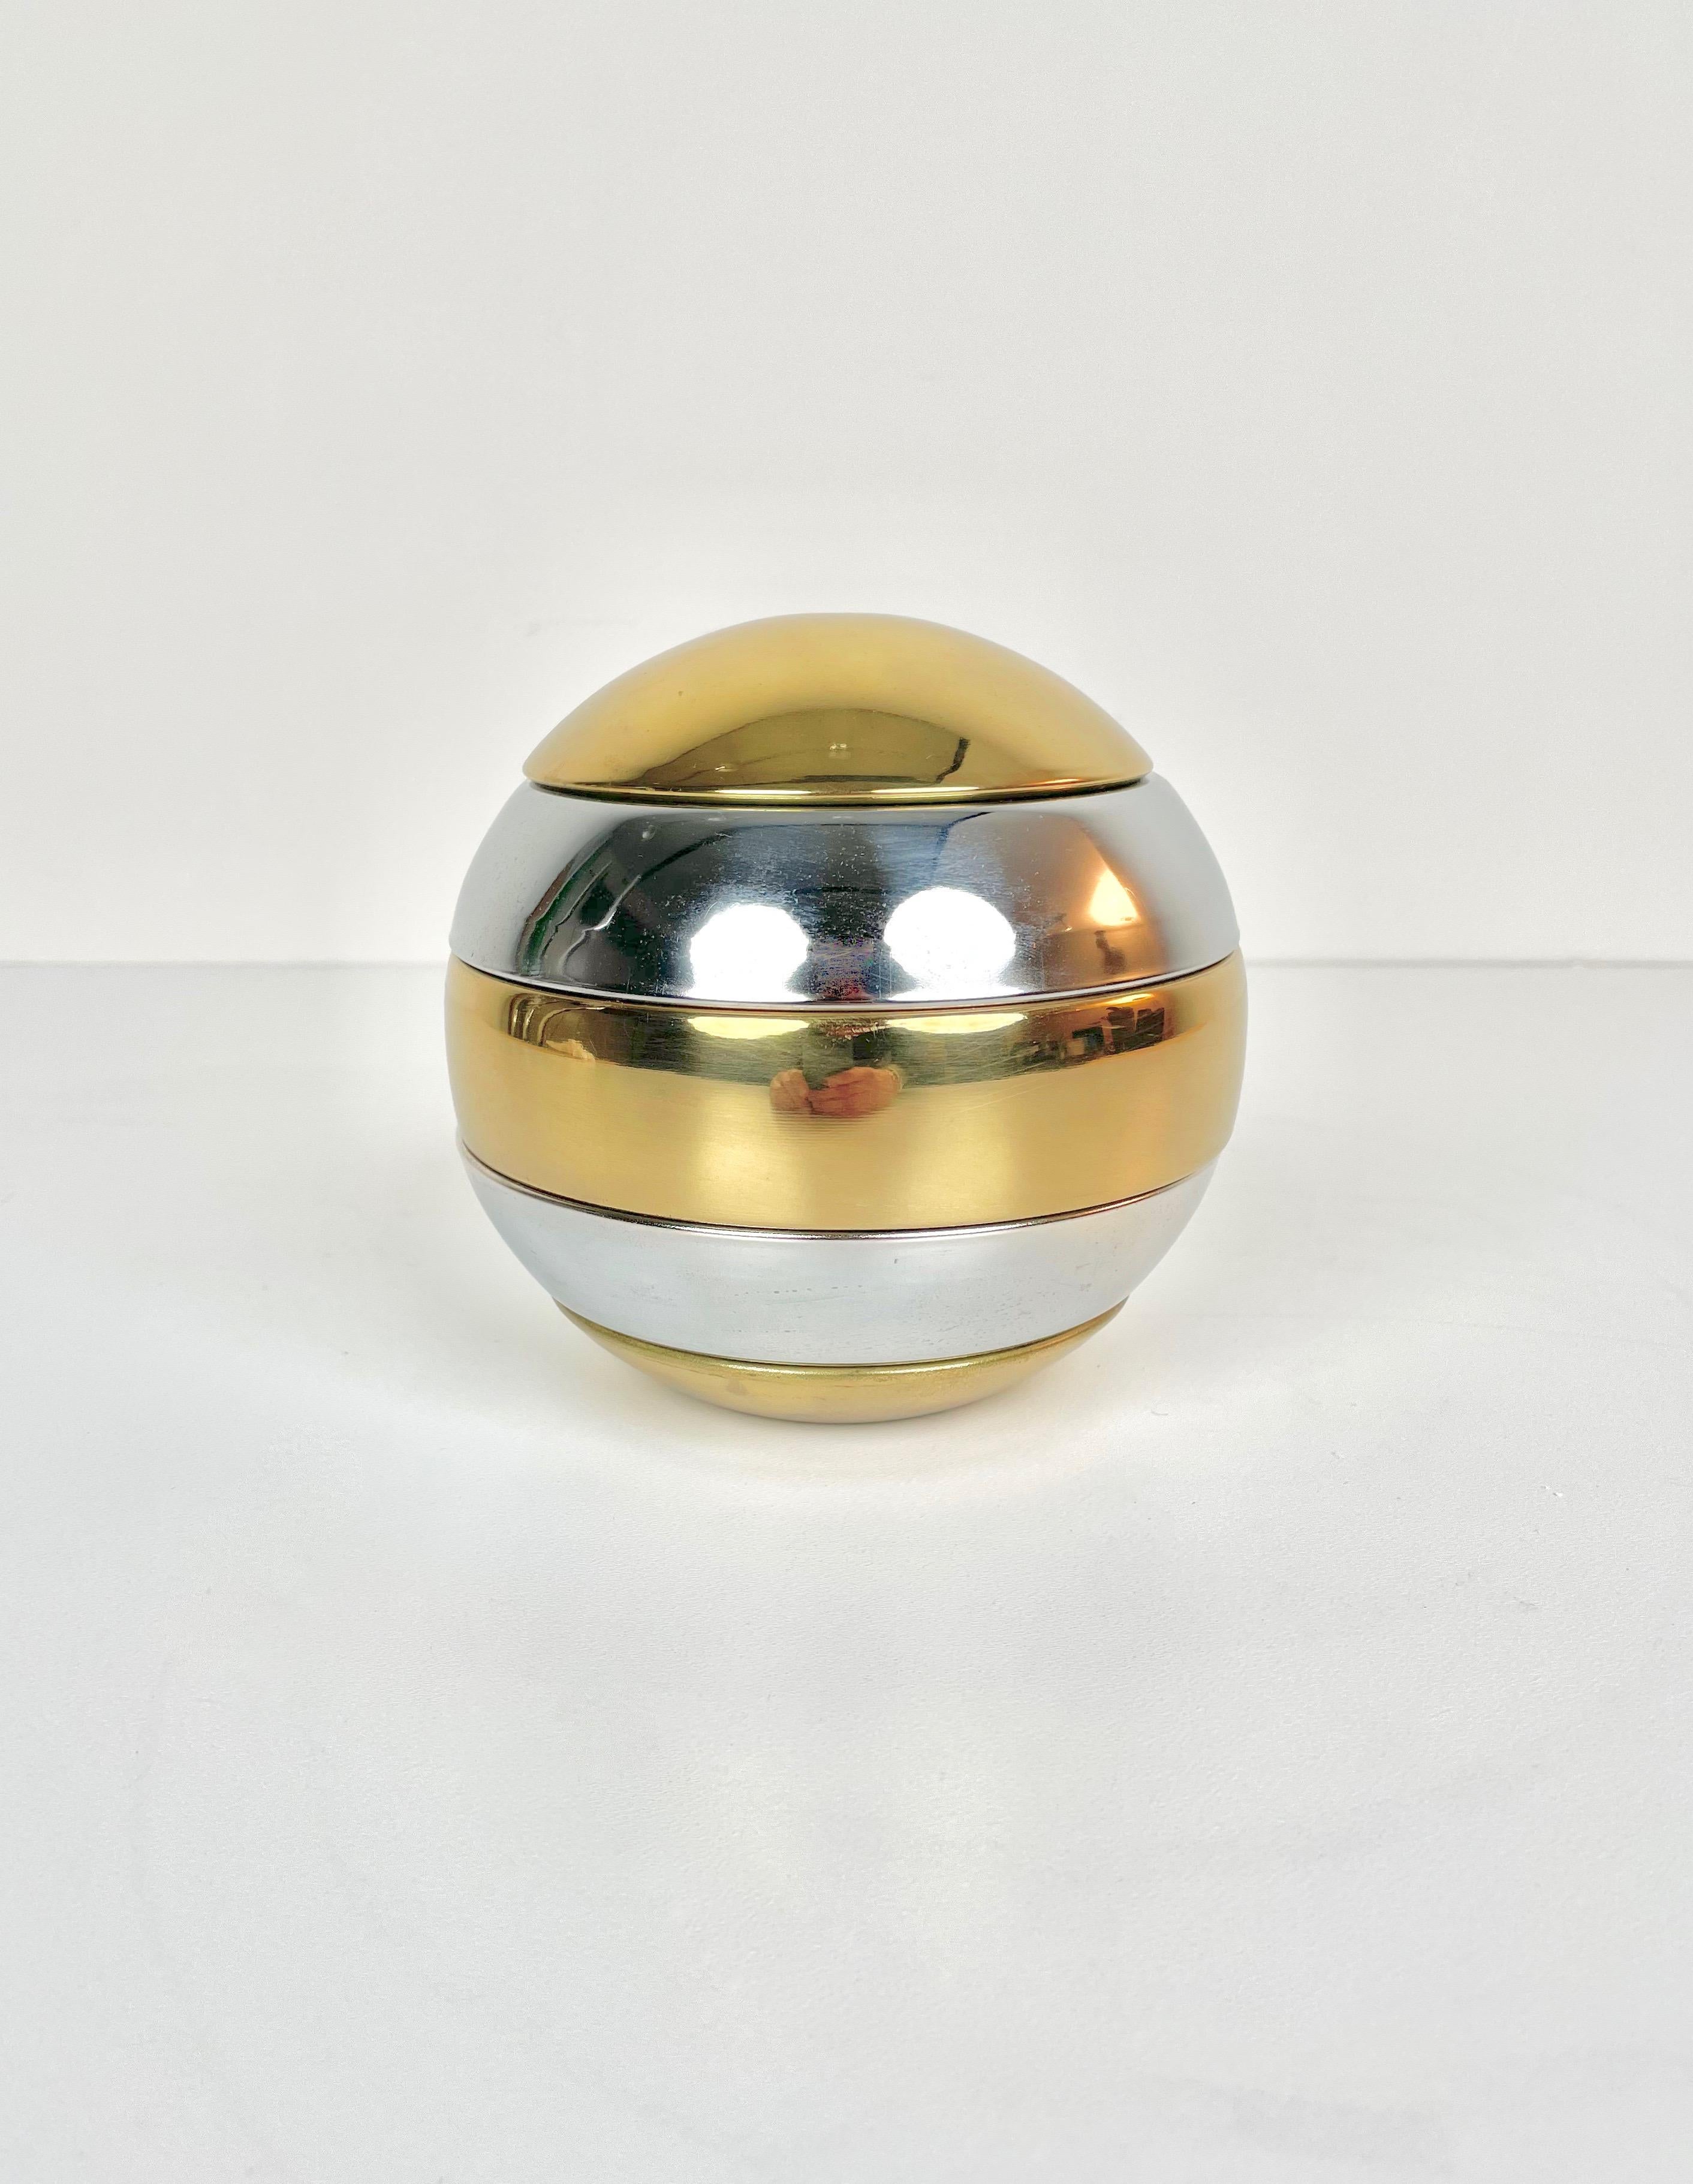 Globe shaped stackable ashtrays or bowls in chrome and brass in the style of the Italian designer Tommaso Barbi. Made in Italy in the 1970s.